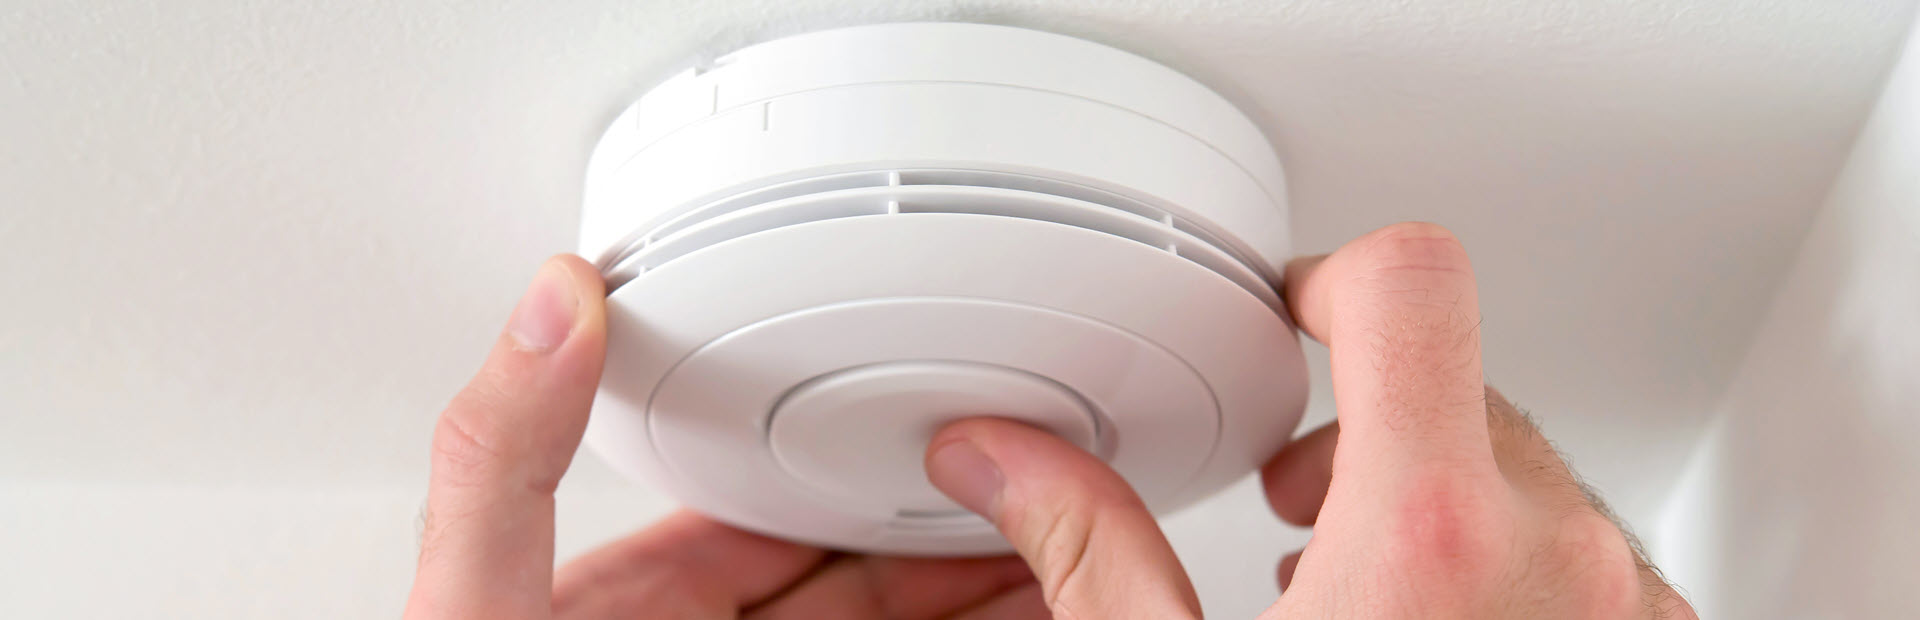 Fire alarms and carbon monoxide detectors for the new Scottish repairing standard.